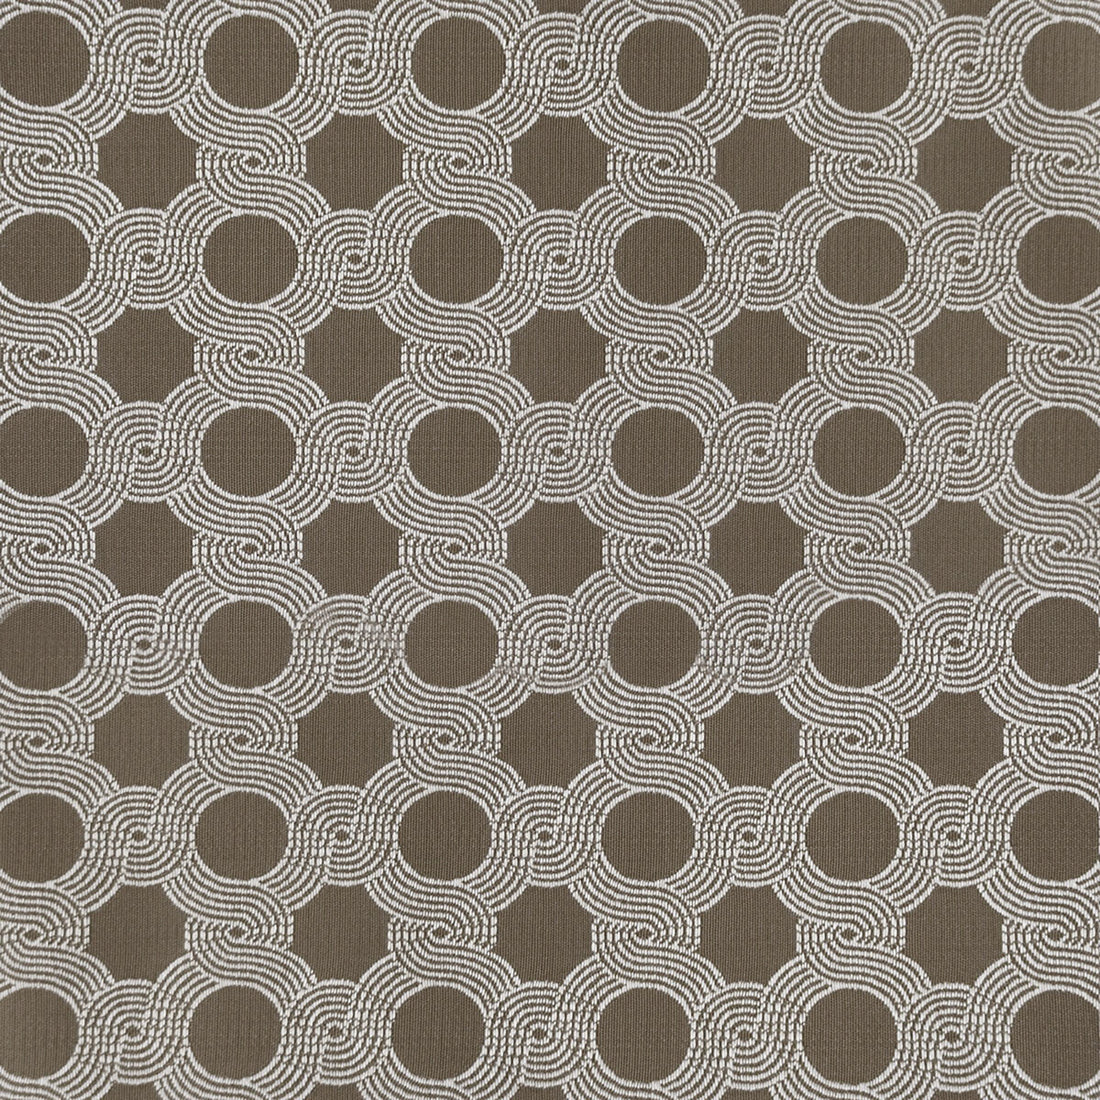 Nohara fabric in gris color - pattern GDT5641.006.0 - by Gaston y Daniela in the Gaston Japon collection